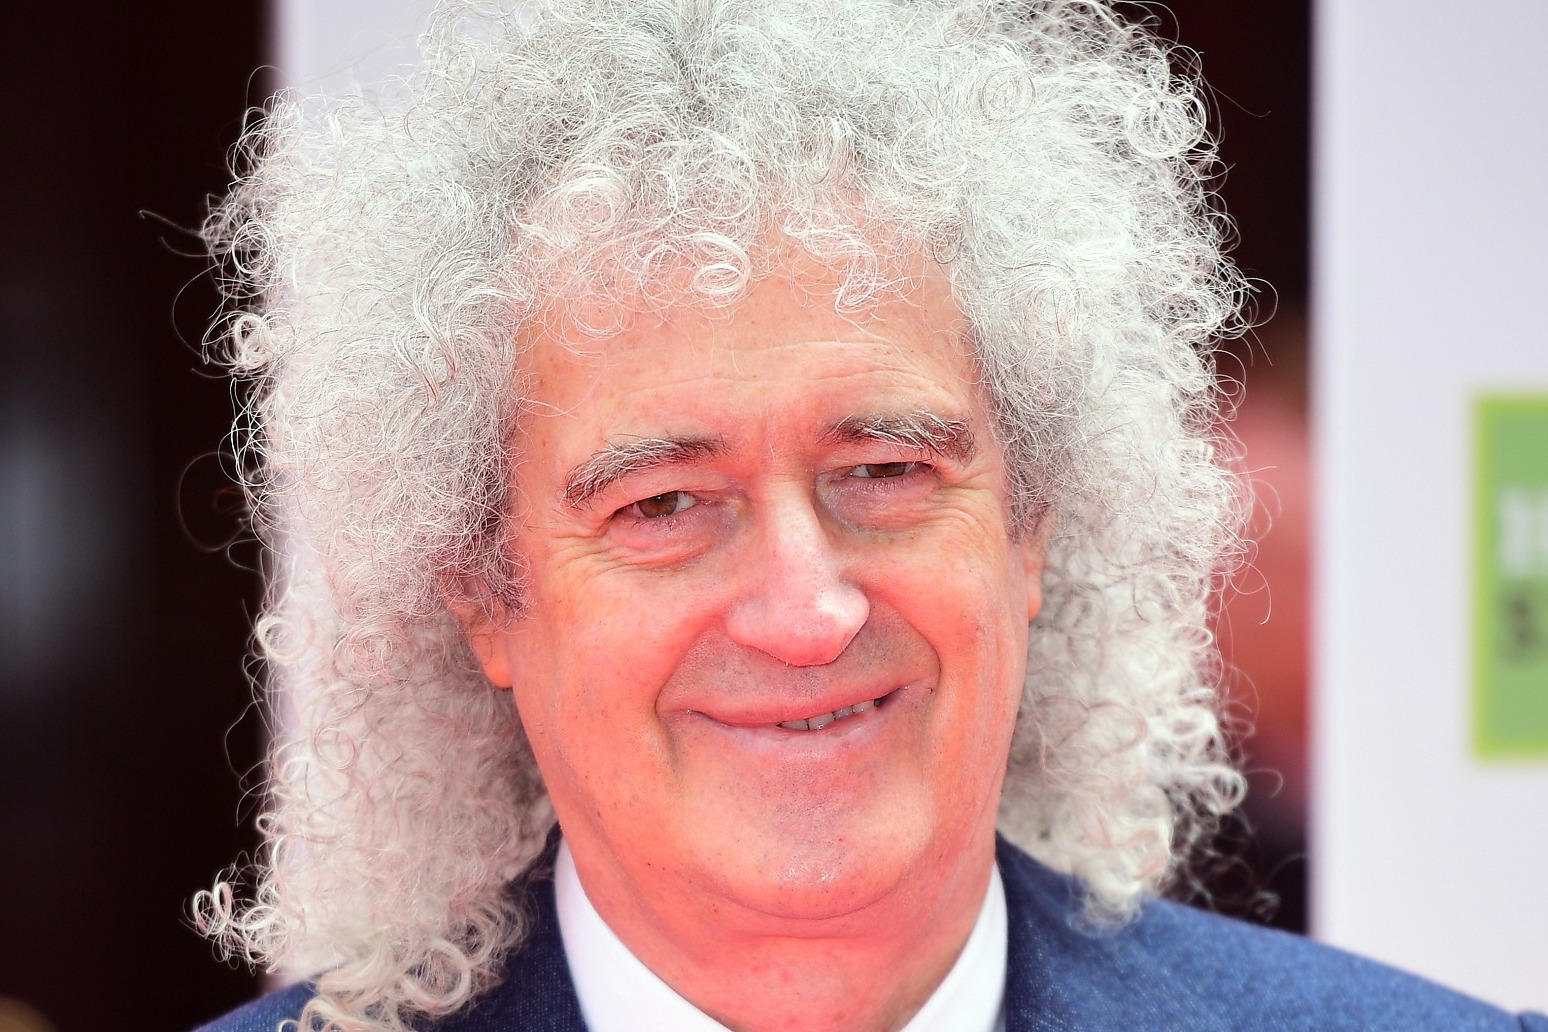 Brian May releases Spanish language song and music video of Another World track 